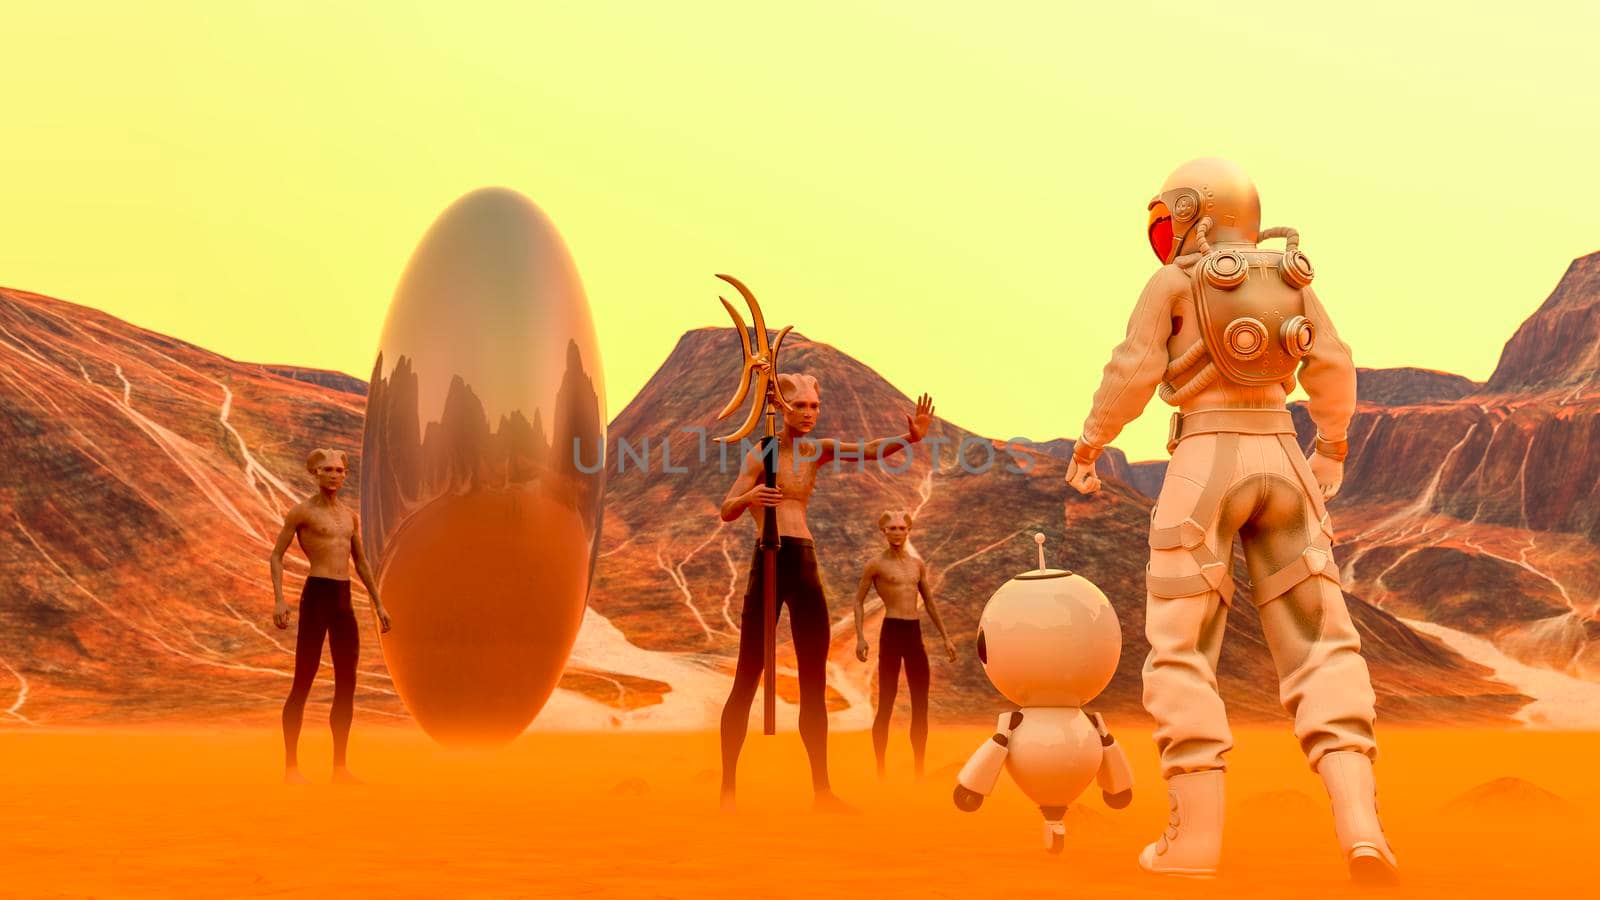 Astronaut and small robot facing a strange egg-shaped object and aliens at the spacewalk on a desert planet by ankarb